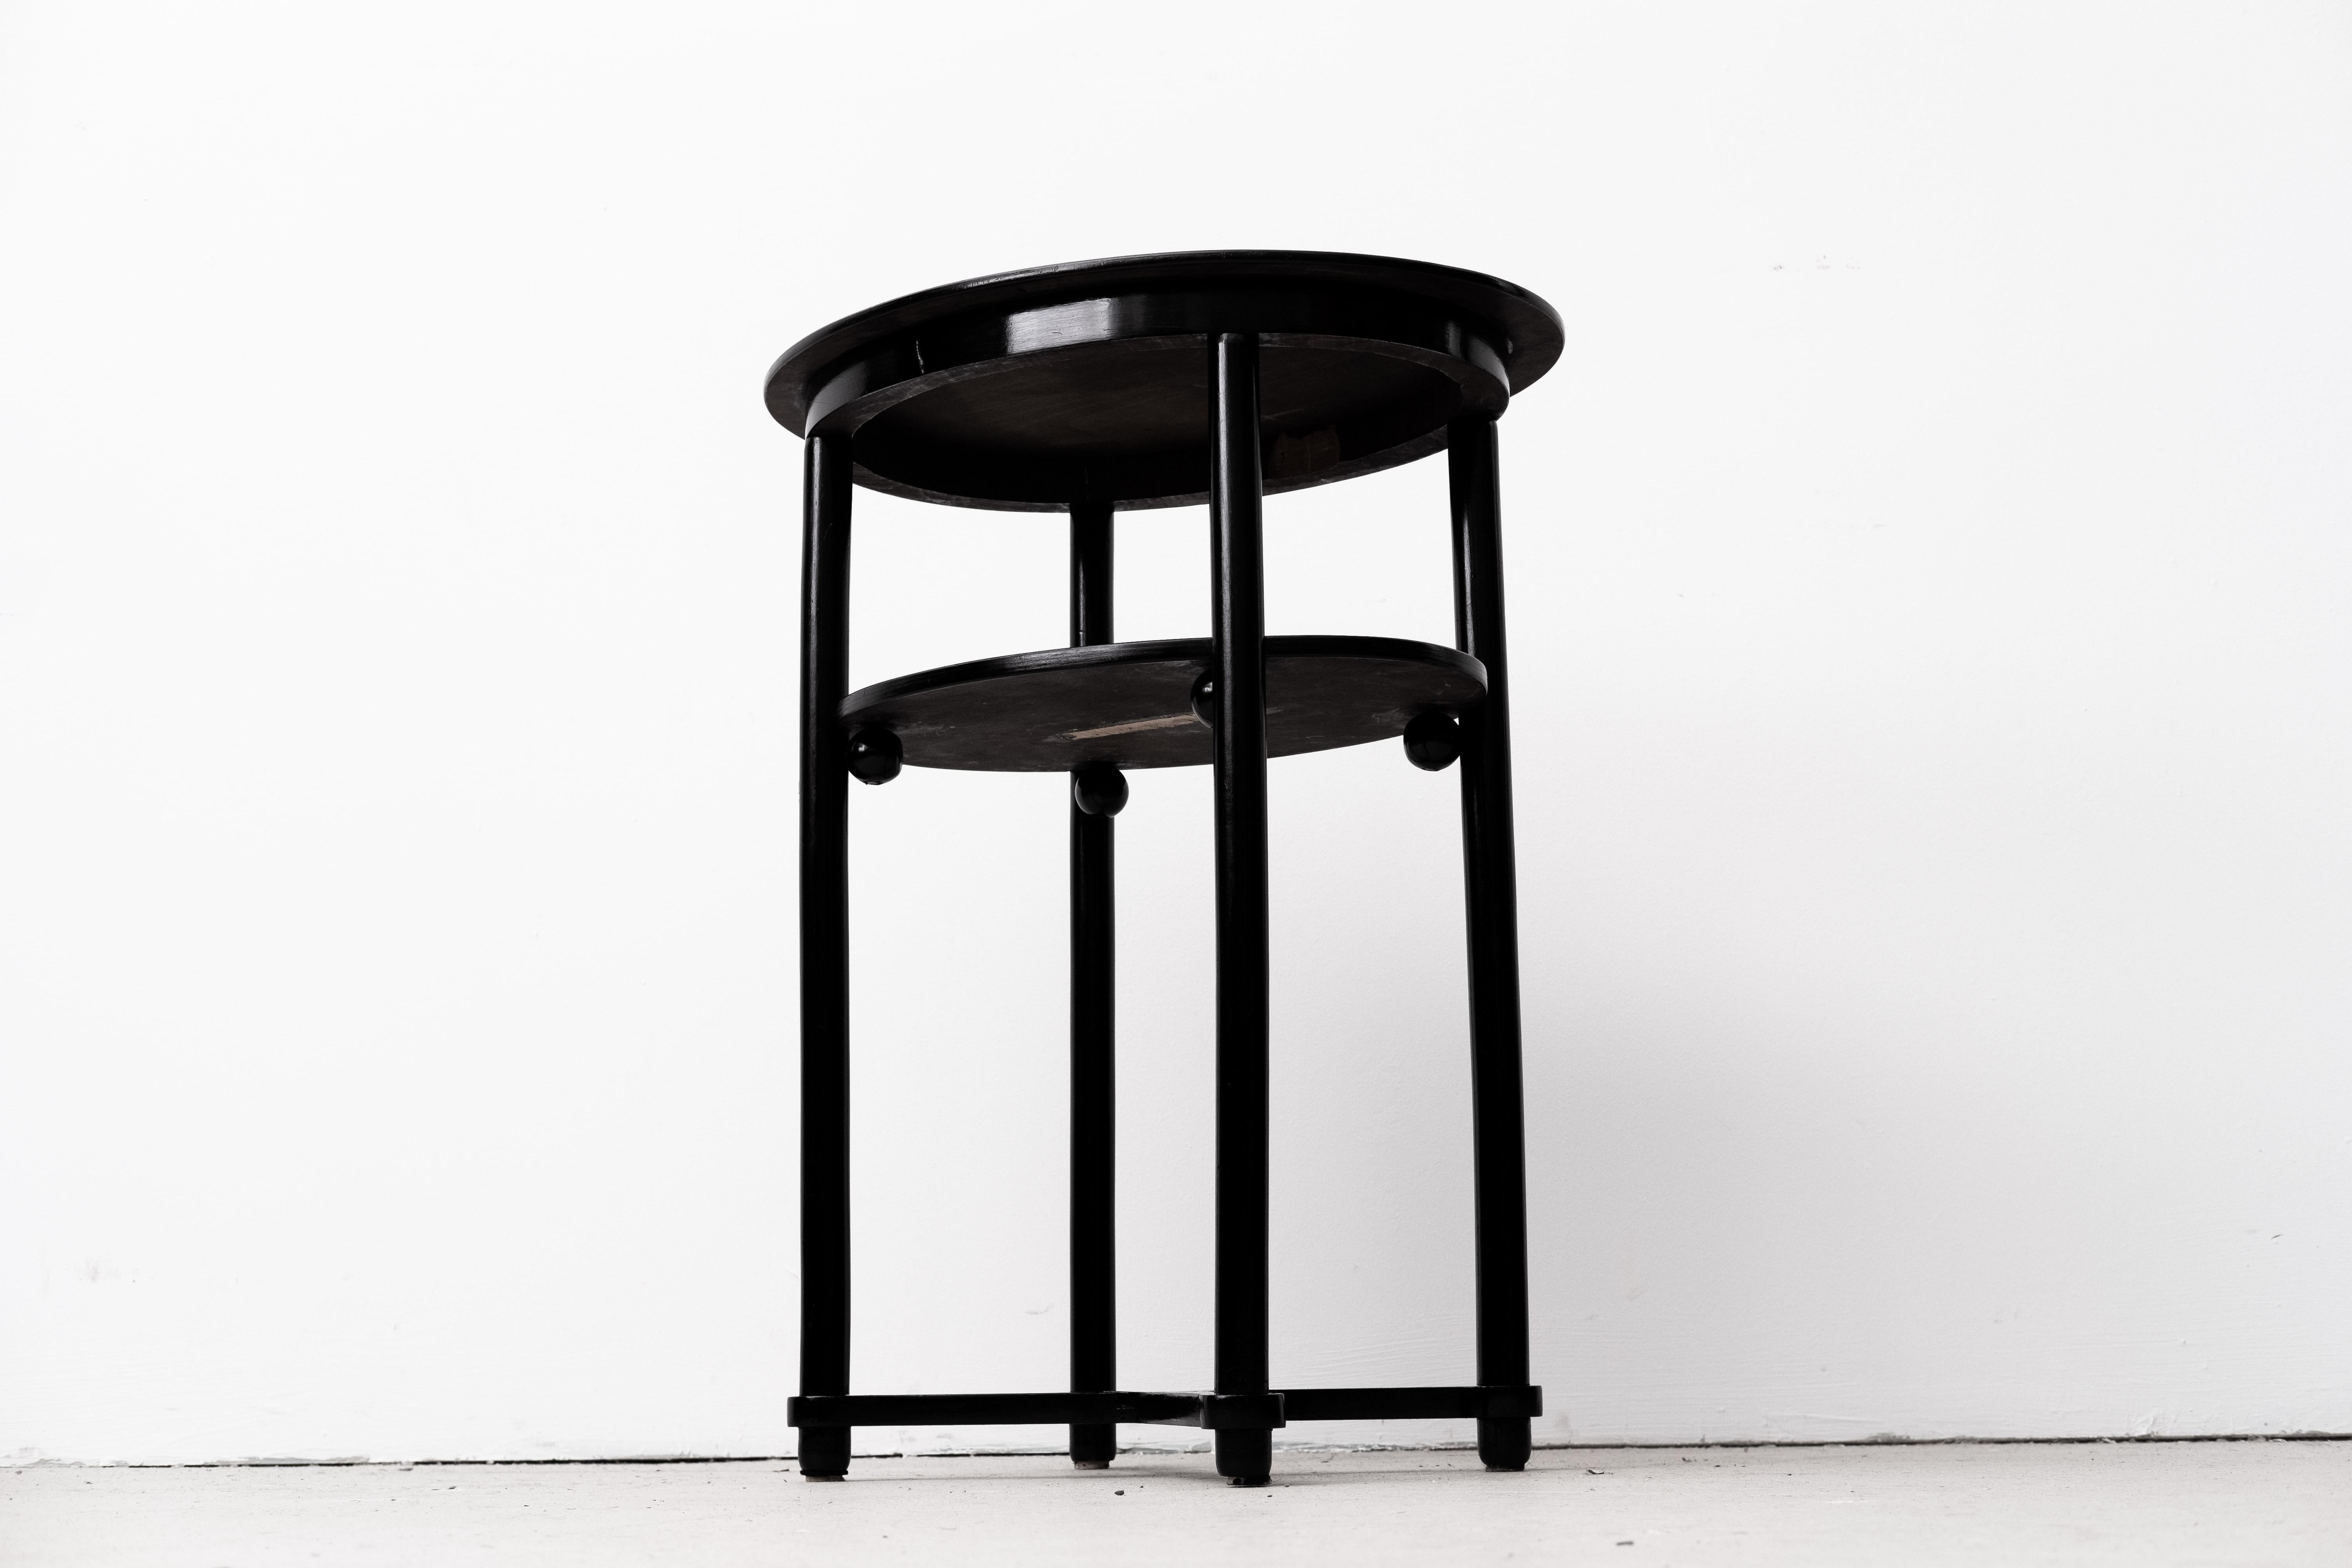 Secession Sidetable, attr. to J. Hoffmann, ex. by Fischel & Söhne (CZK, 1915) For Sale 7